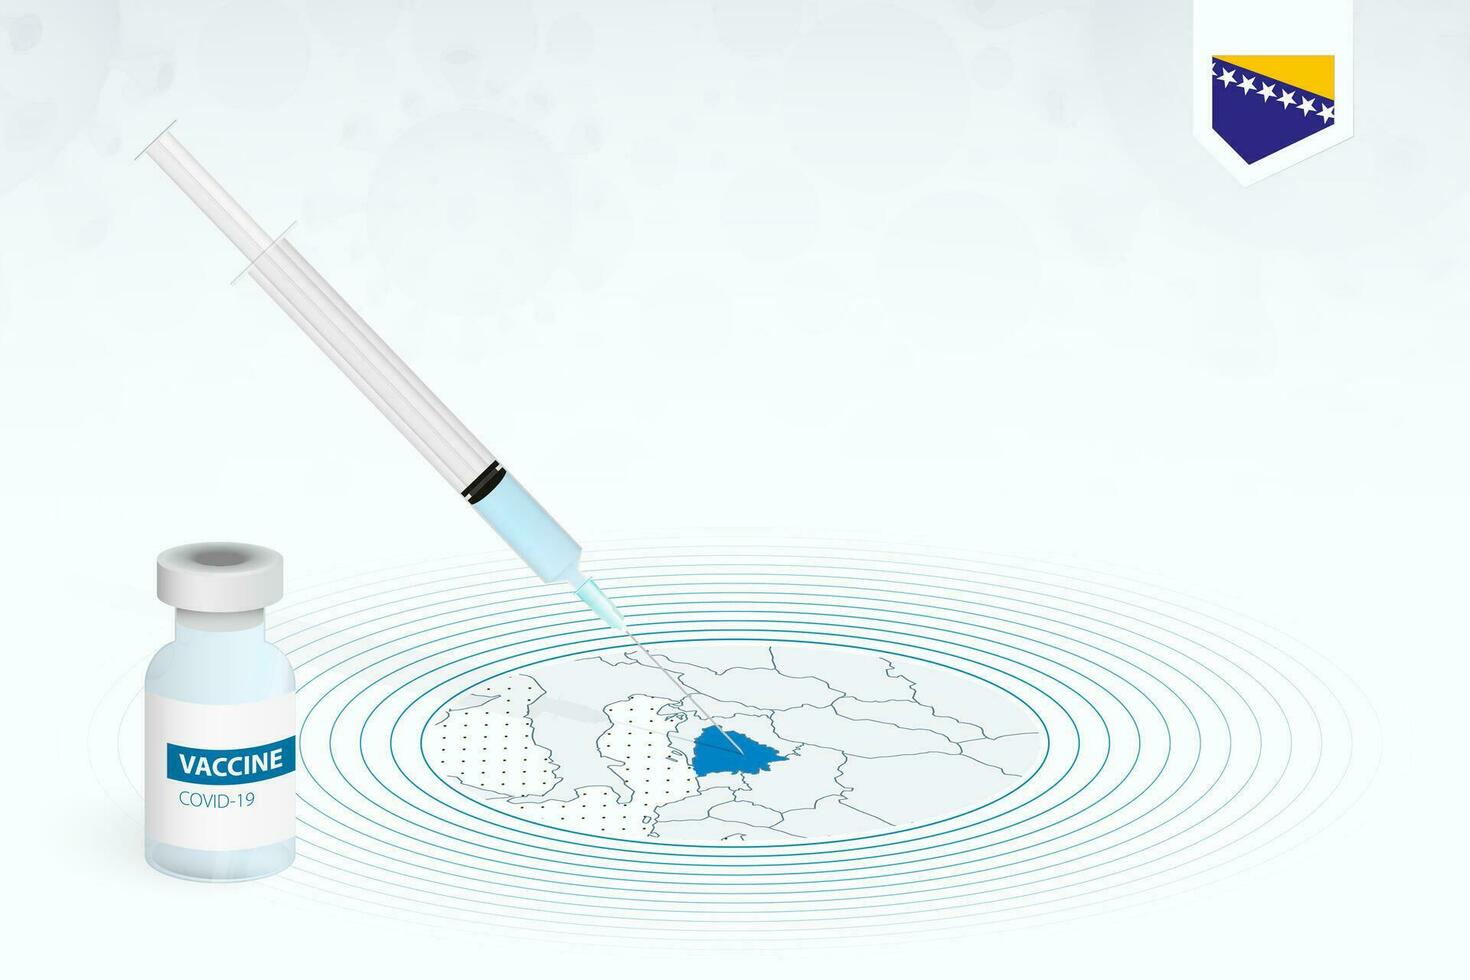 COVID-19 vaccination in Bosnia and Herzegovina, coronavirus vaccination illustration with vaccine bottle and syringe injection in map of Bosnia and Herzegovina. vector